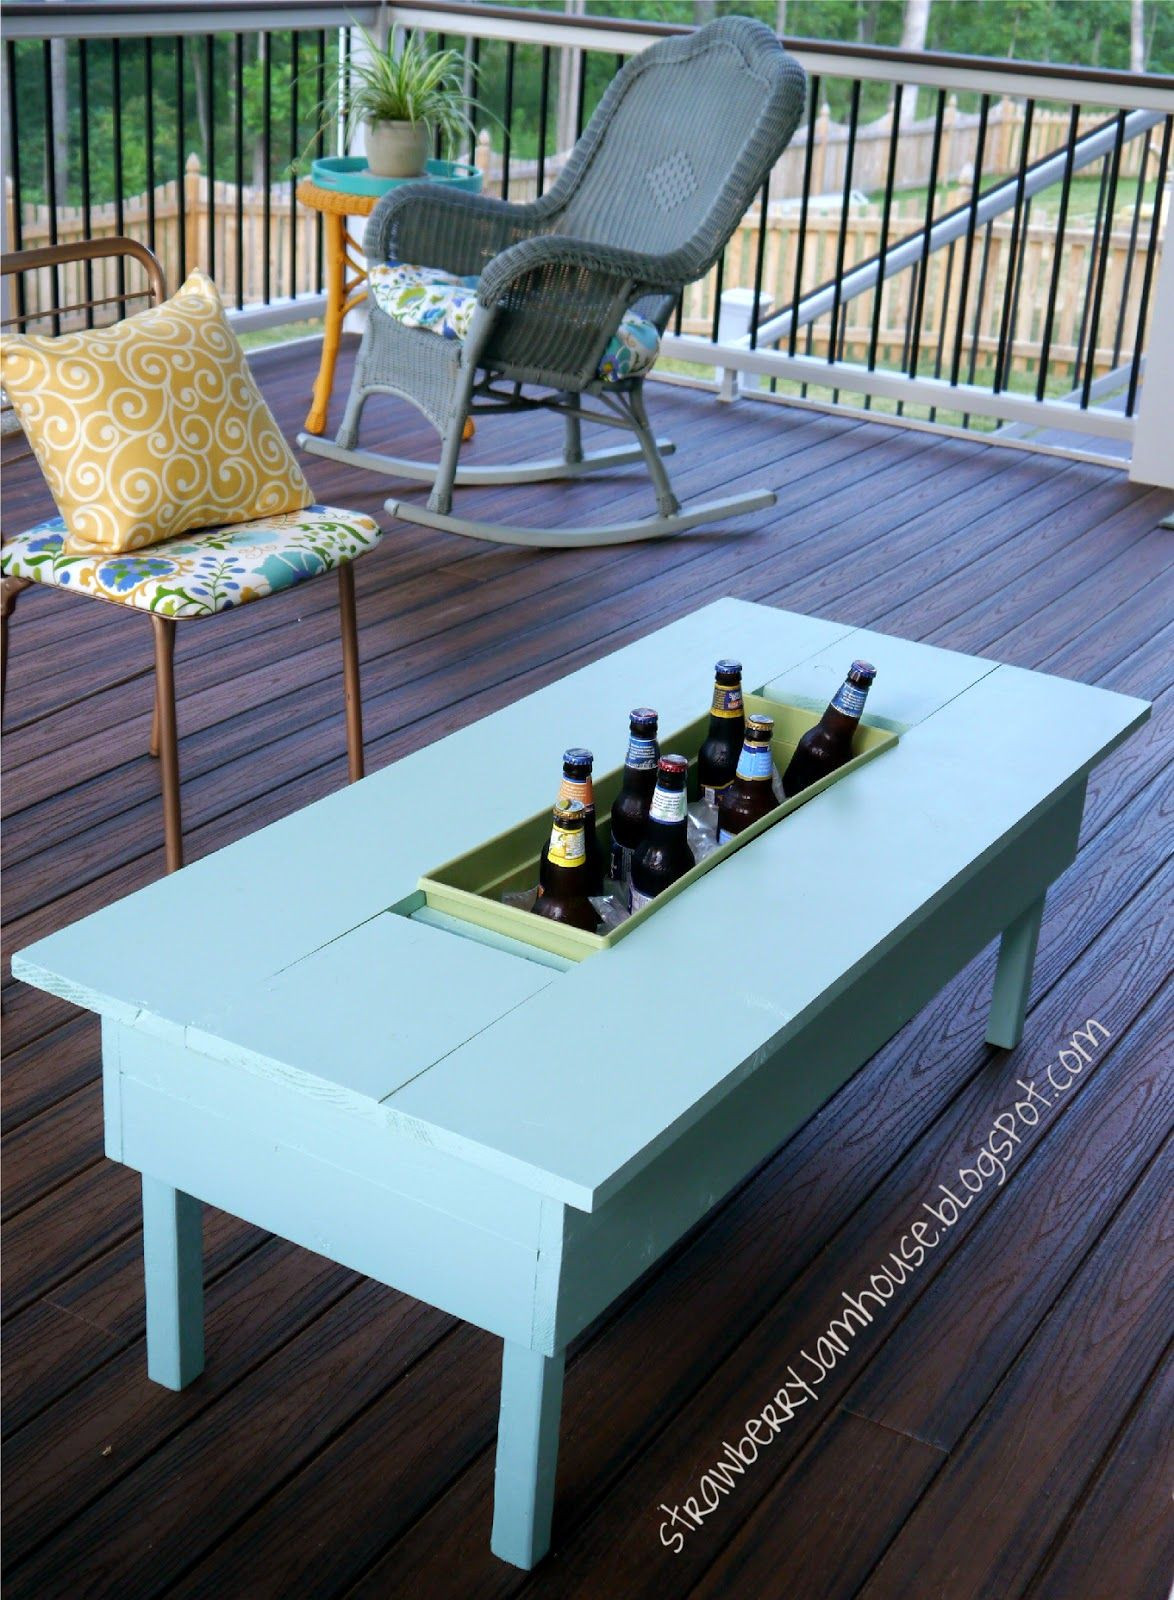 DIY Outdoor Cooler Table
 How To Build Upgrade An Outdoor Table With Built in Cooler